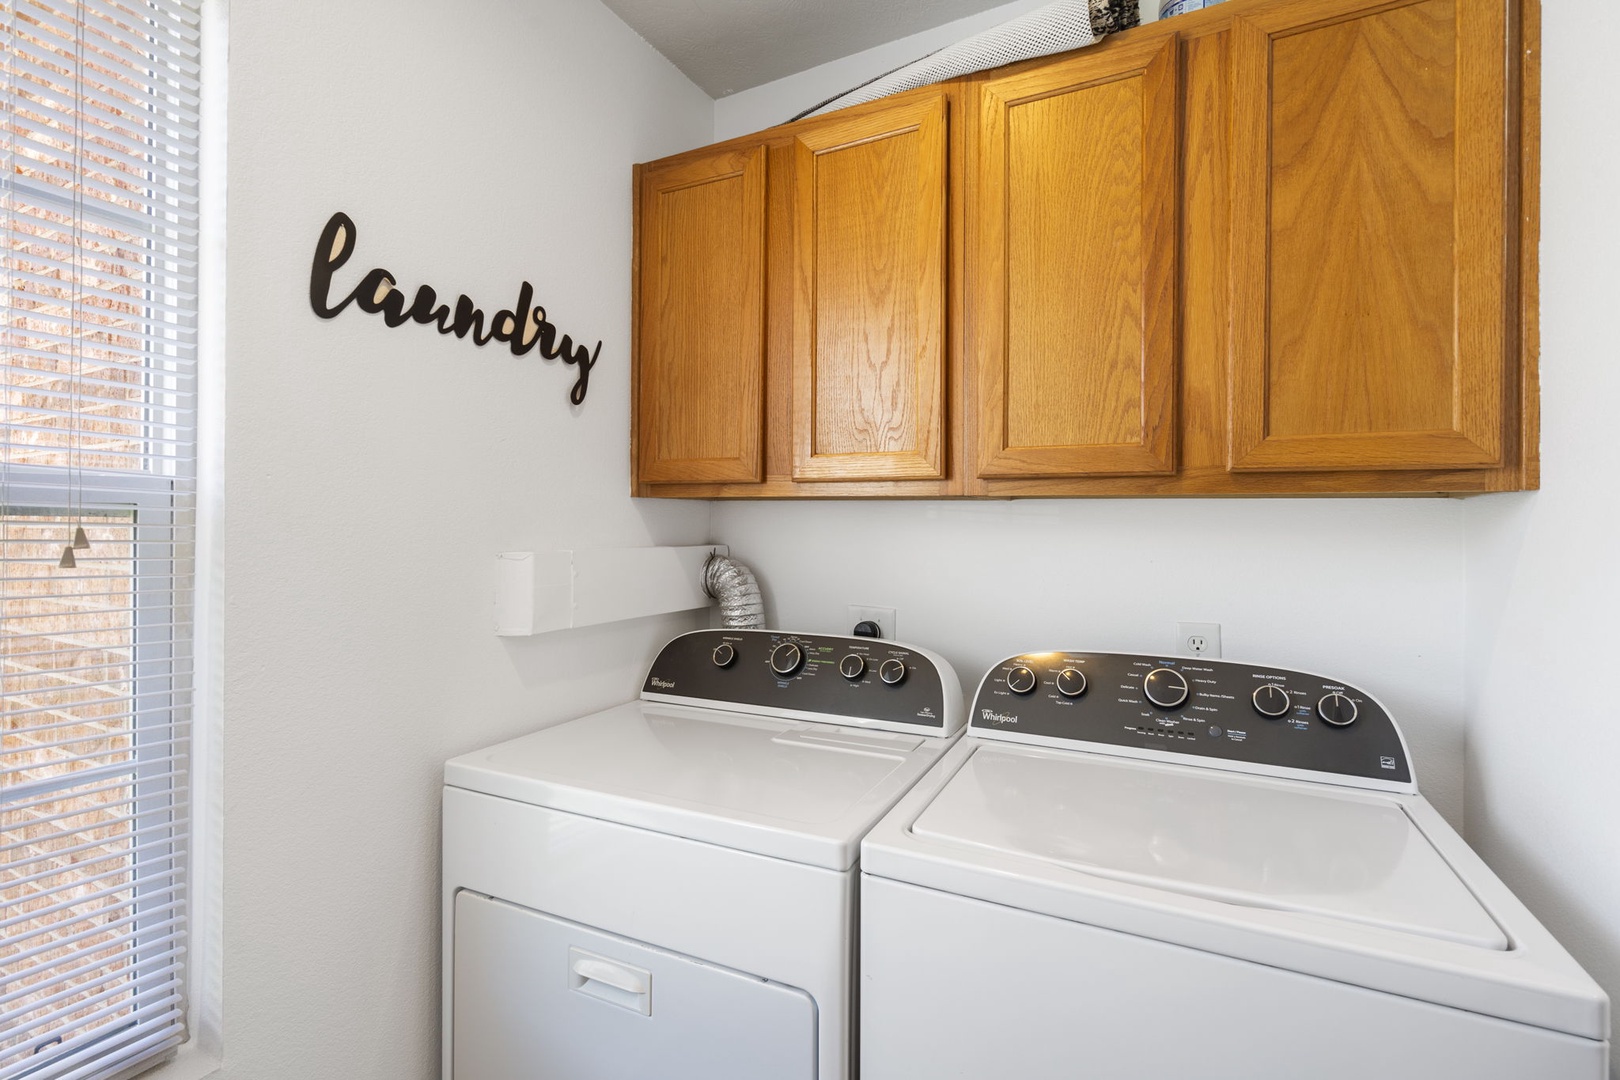 Enjoy access to private laundry during your stay, tucked away past the kitchen